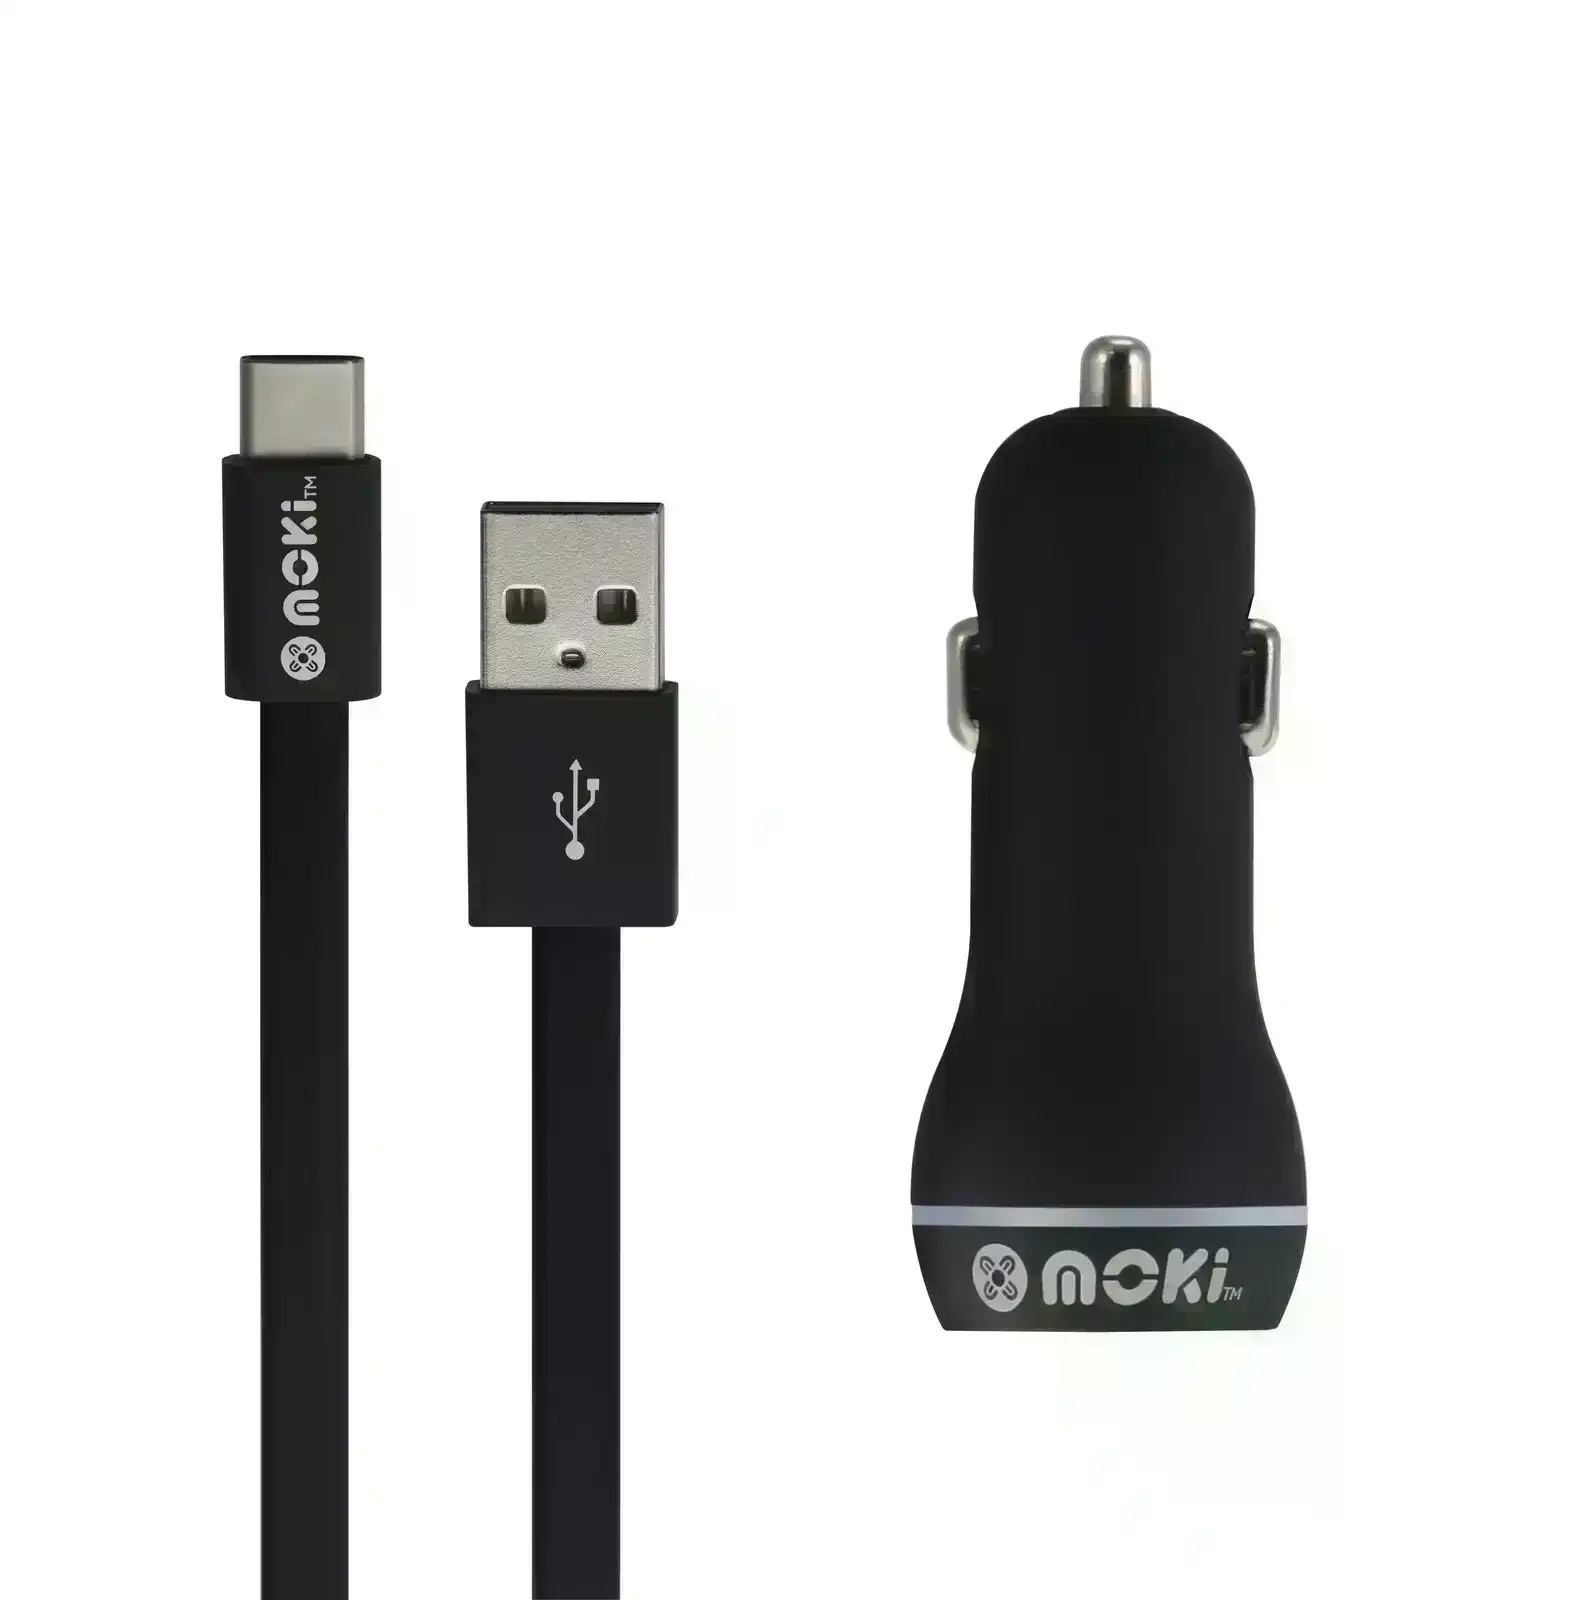 Moki 90cm Type-C to USB Sync/Charge Cable w/ Dual USB Car Charger f/ Smartphones